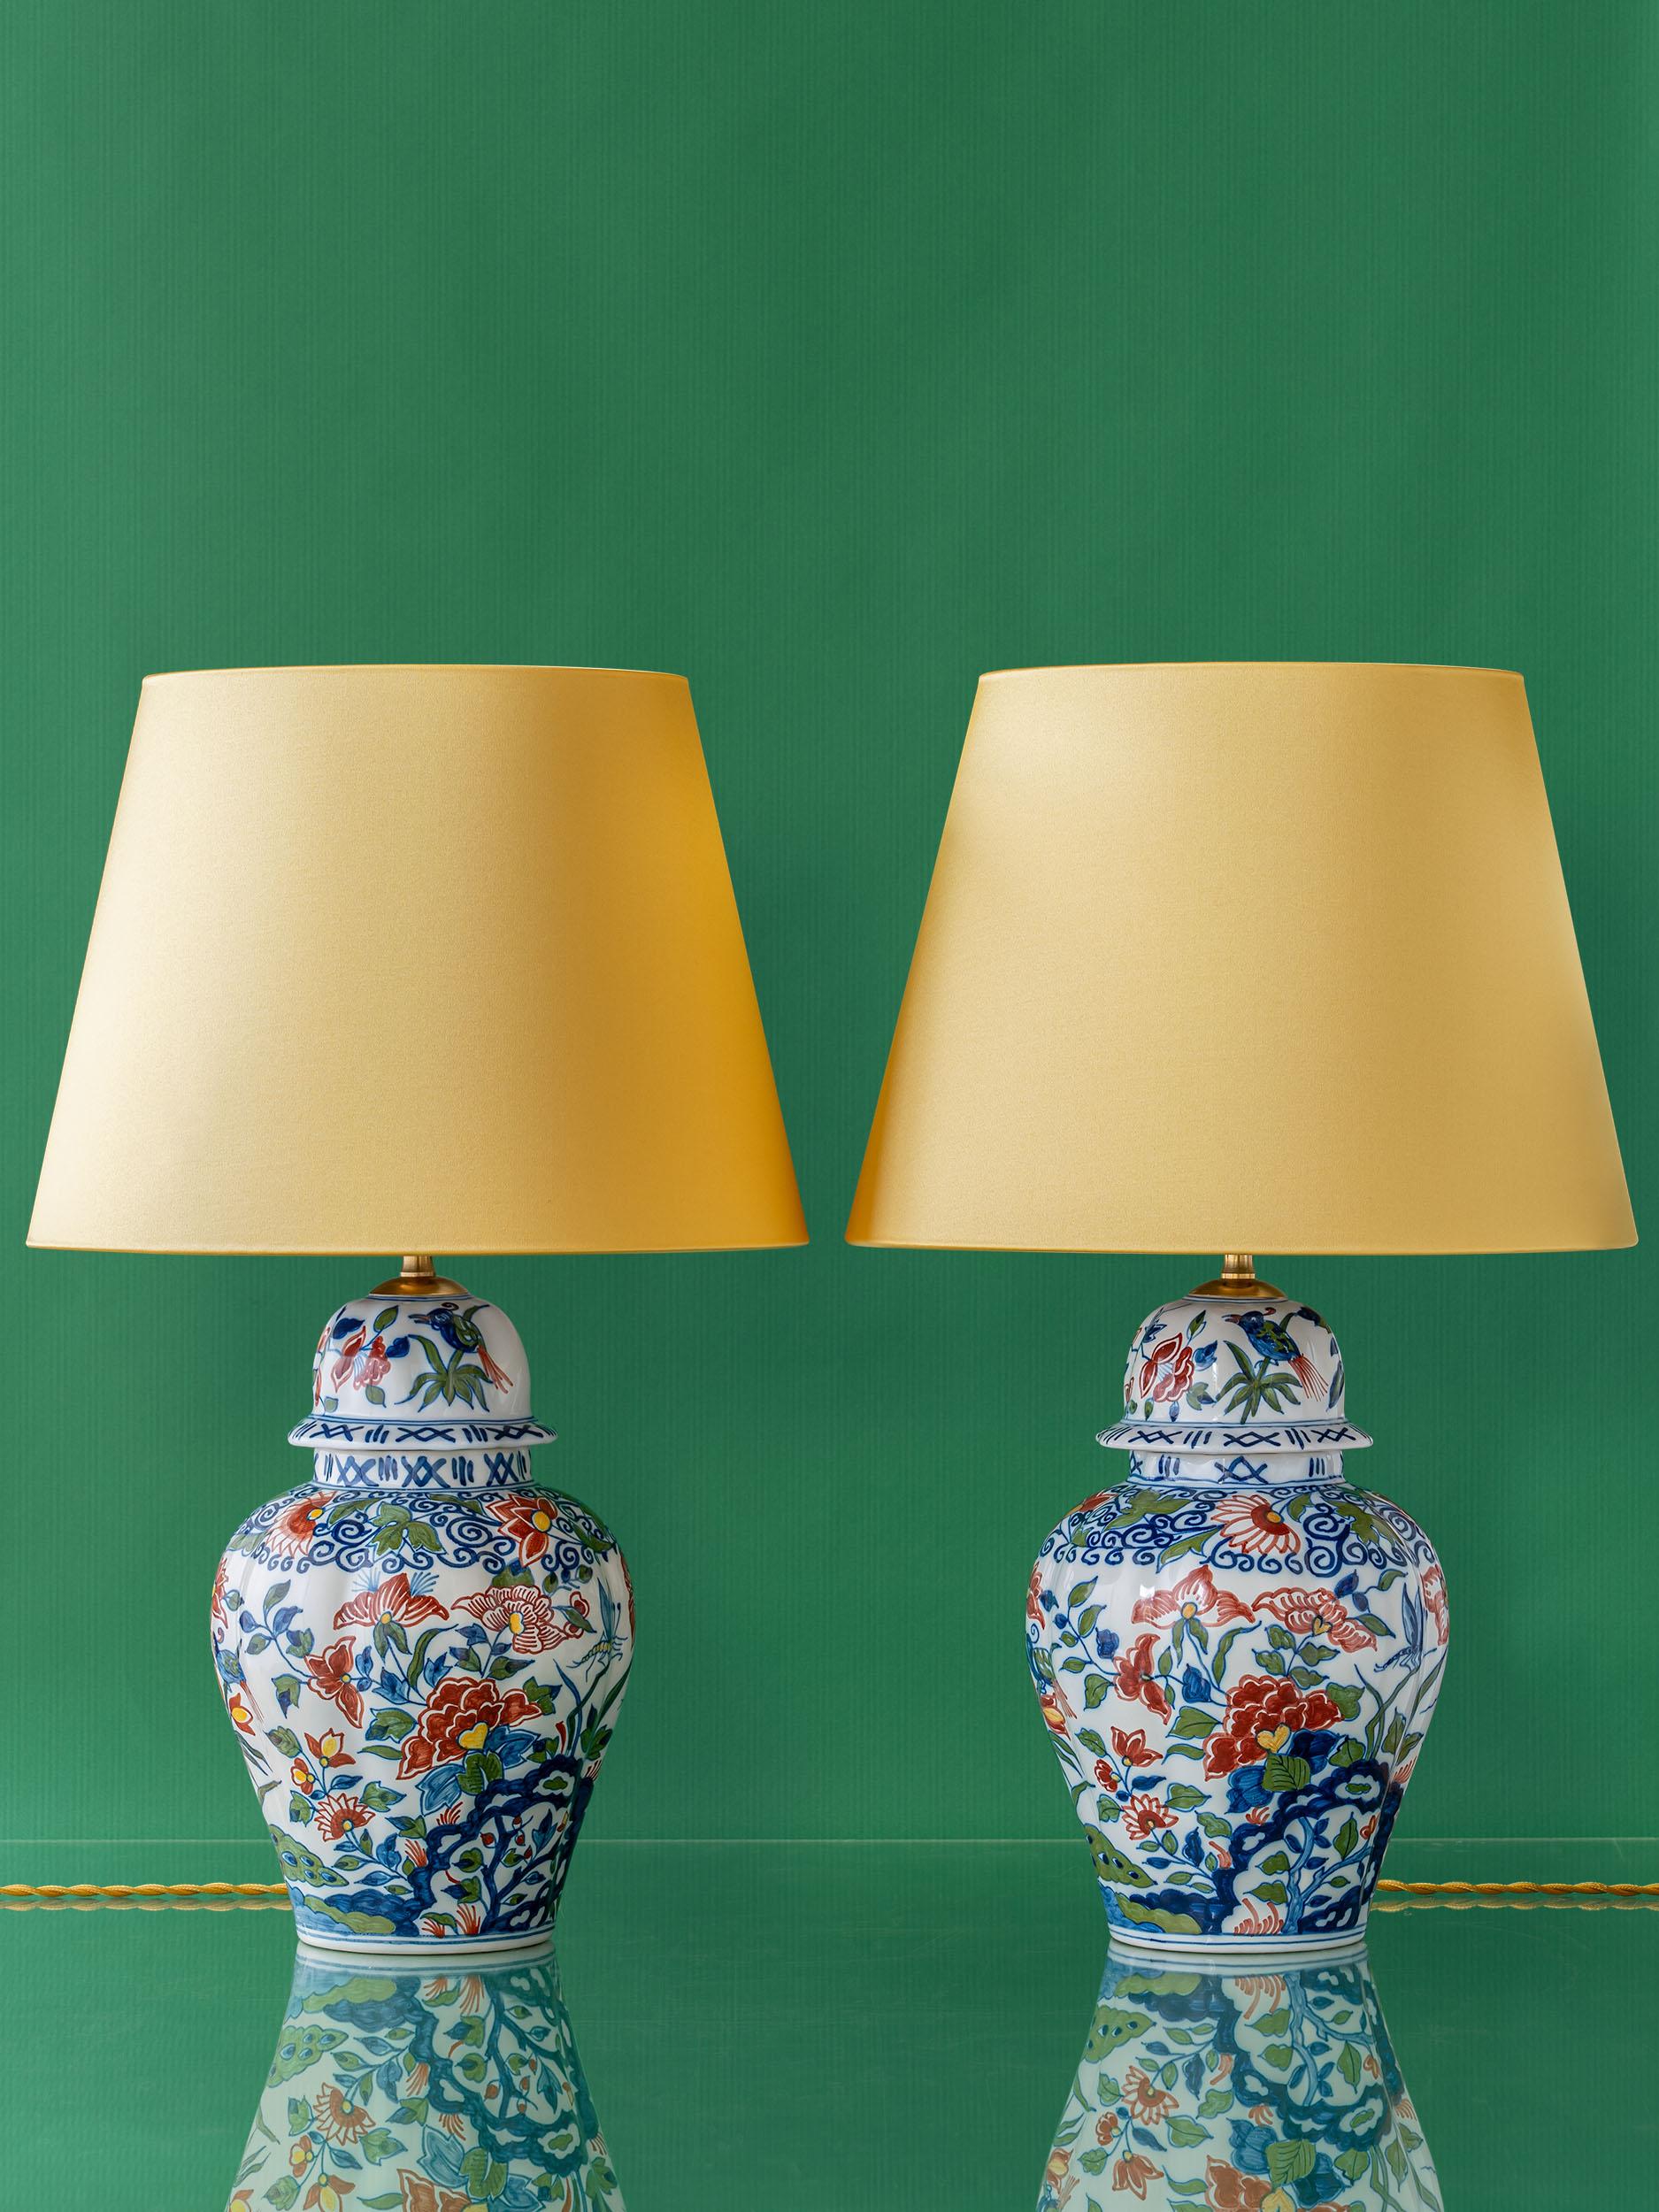 A one-of-a-kind pair of lamps, Kie & Vit  have been lovingly handcrafted from gorgeous, vintage, hand-painted vases in a Delft style by Royal Tichelaar Makkum, the oldest ceramic company in the Netherlands, established circa 1572. Kie & Vit are